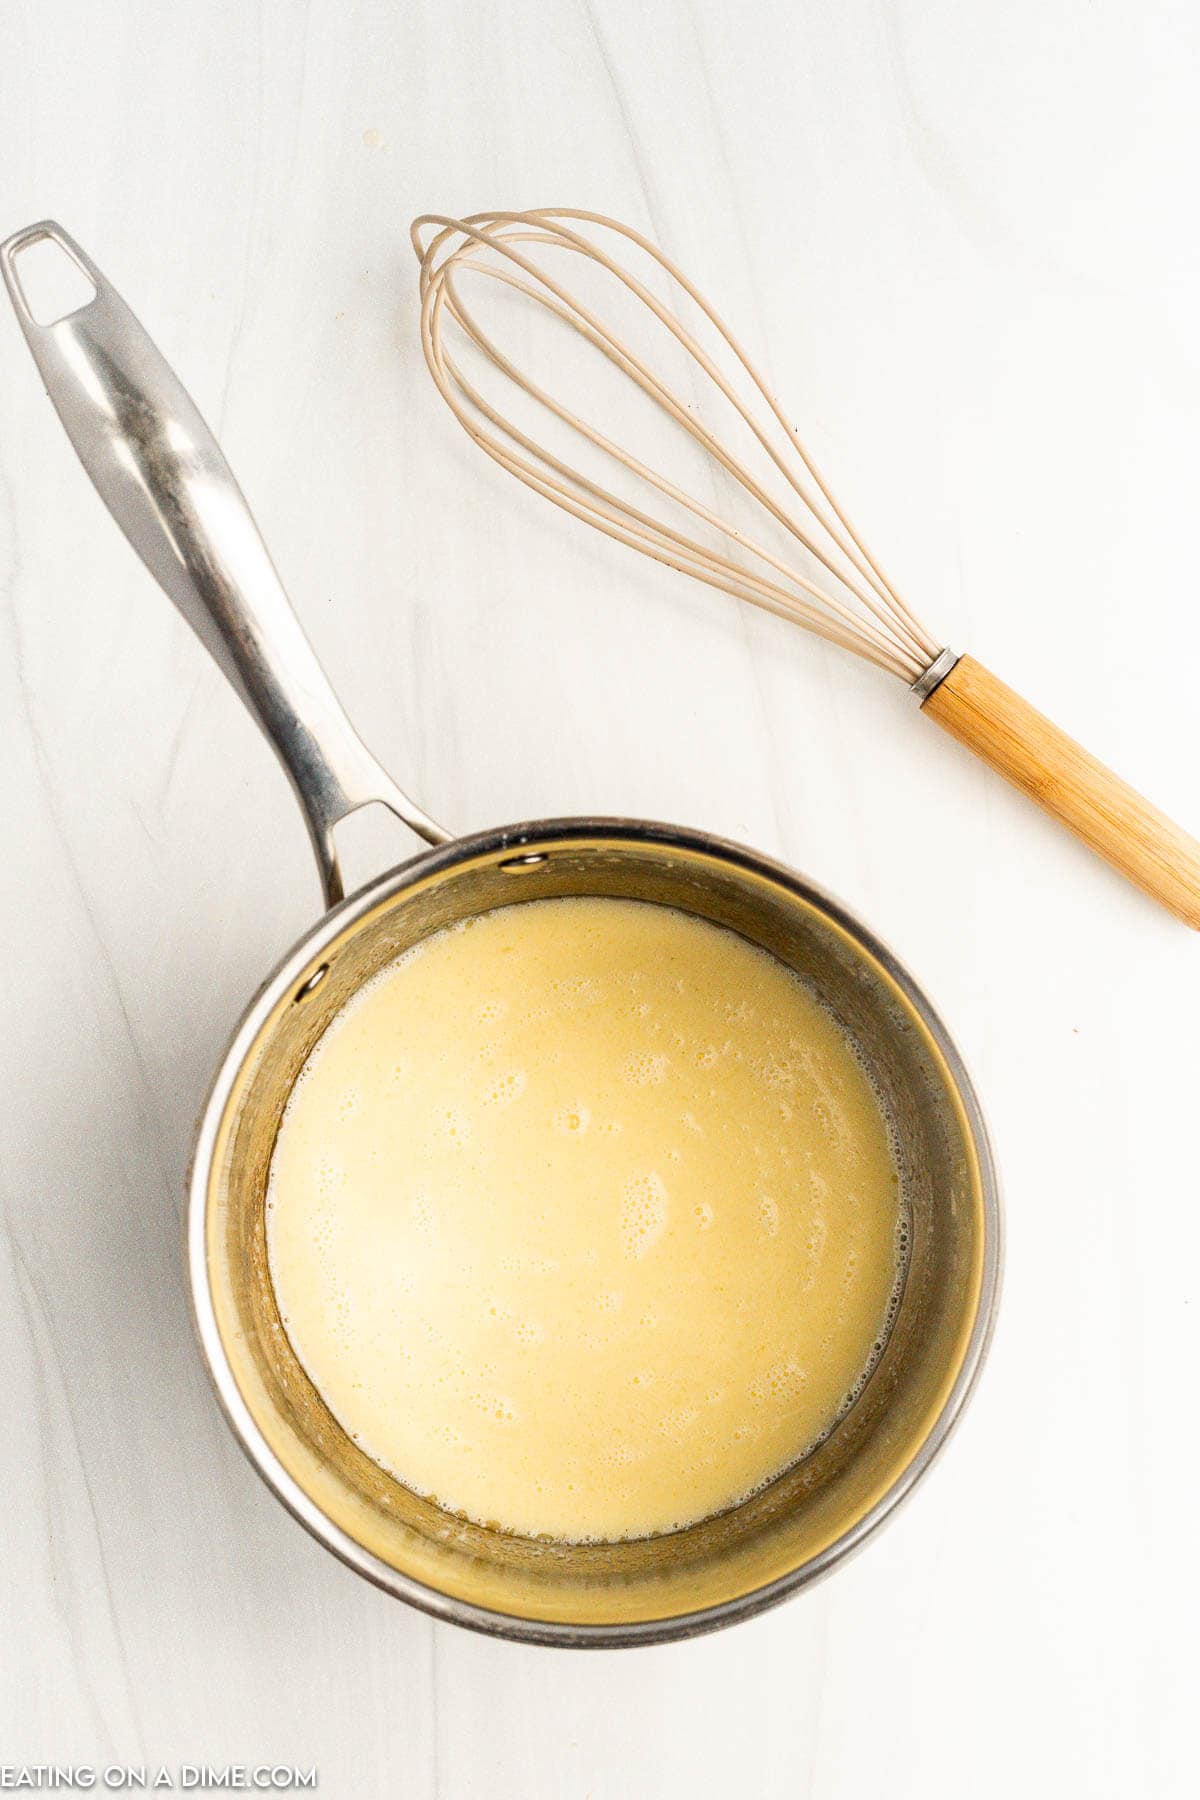 Stirring in half and half in the sauce pan of melted butter